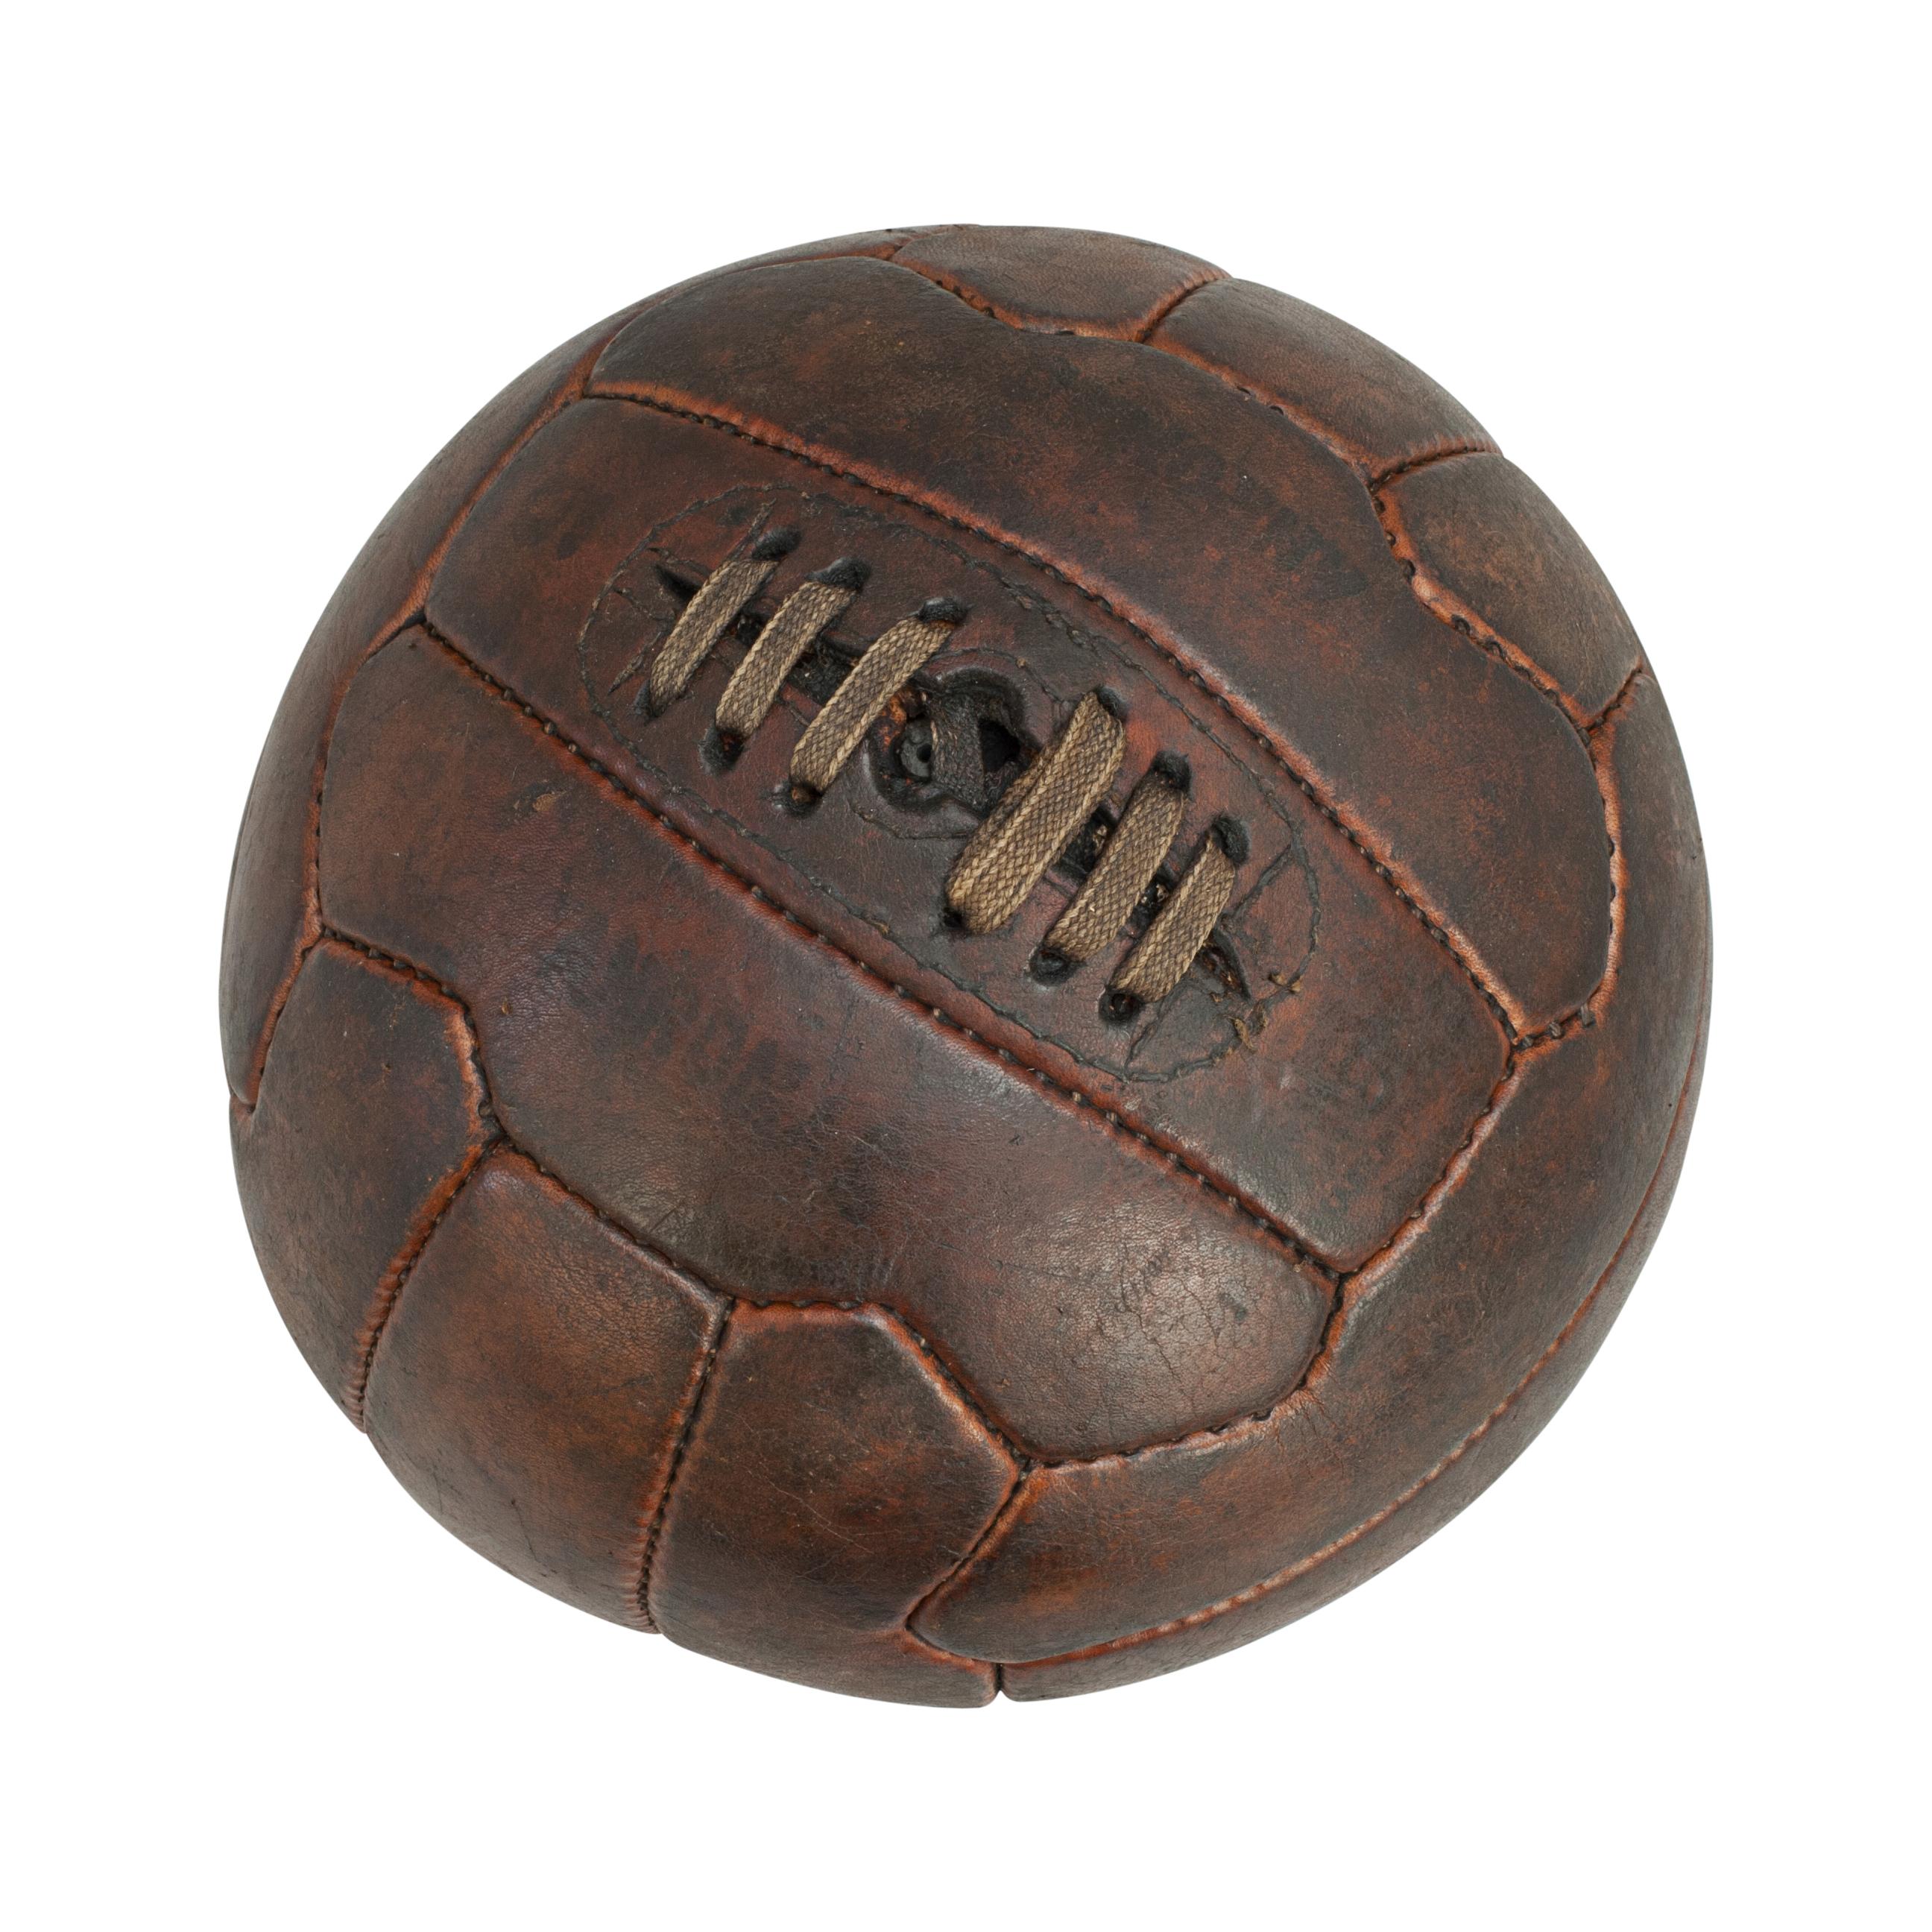 Vintage No.5 leather football.
A traditional hand sewn 18-panel zig-zag leather soccer ball in good original condition. The ball has a lace-up slit to the top to enable bladder inflation. Embossed on the leather football '5, ARIEL, hand sewn